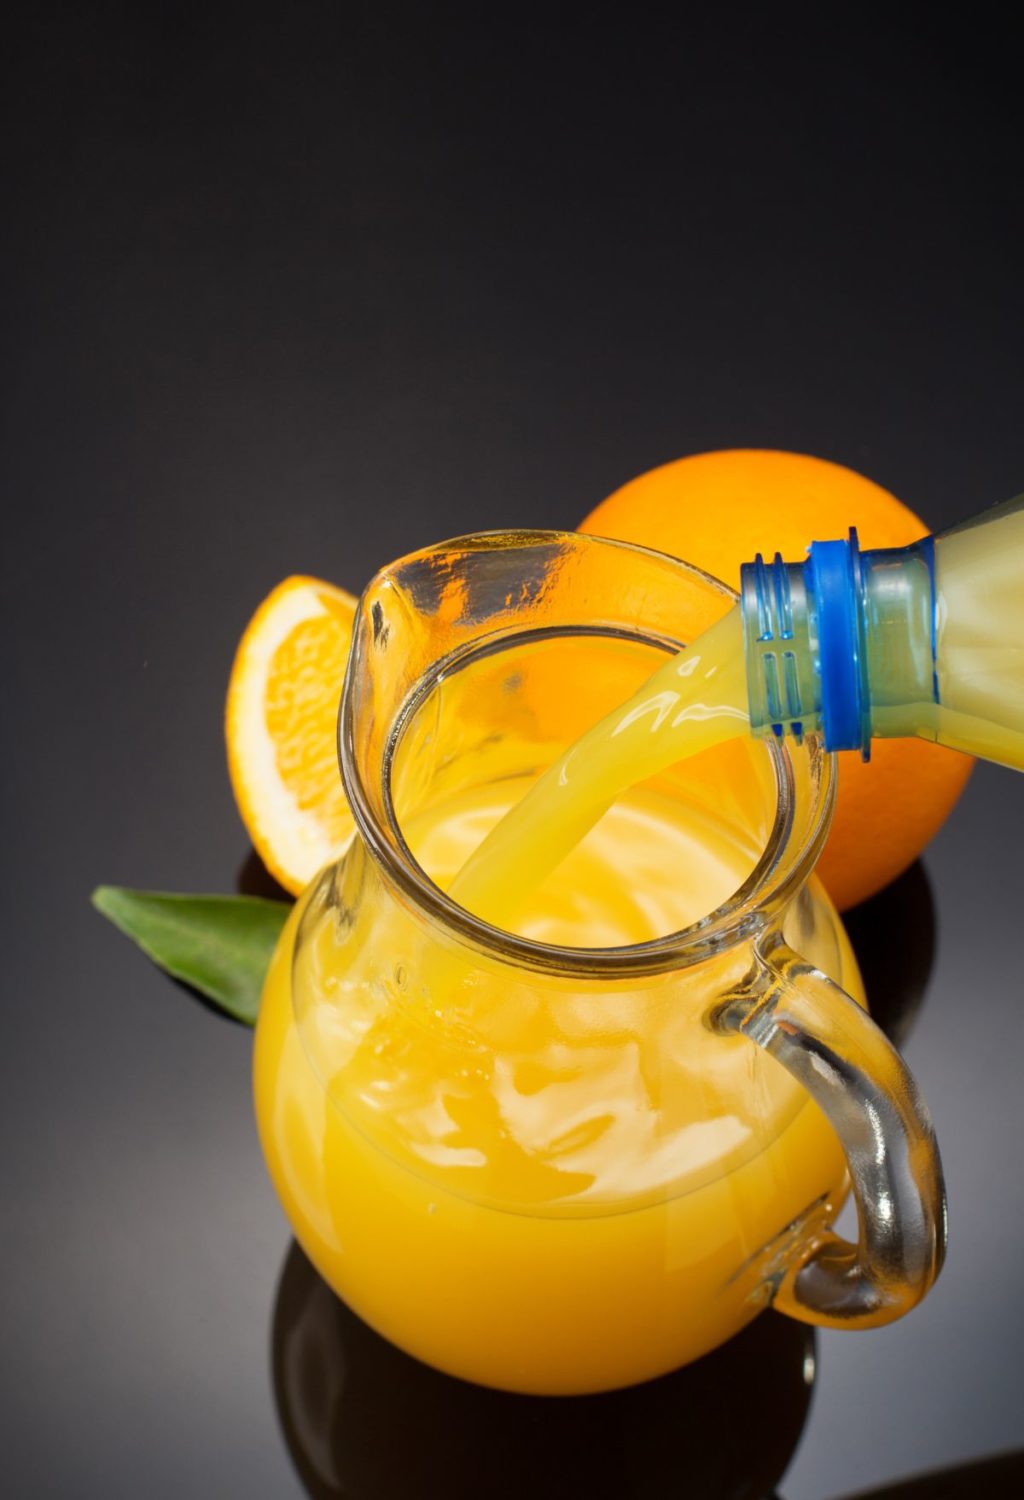 Orange juice being poured into a pitcher.